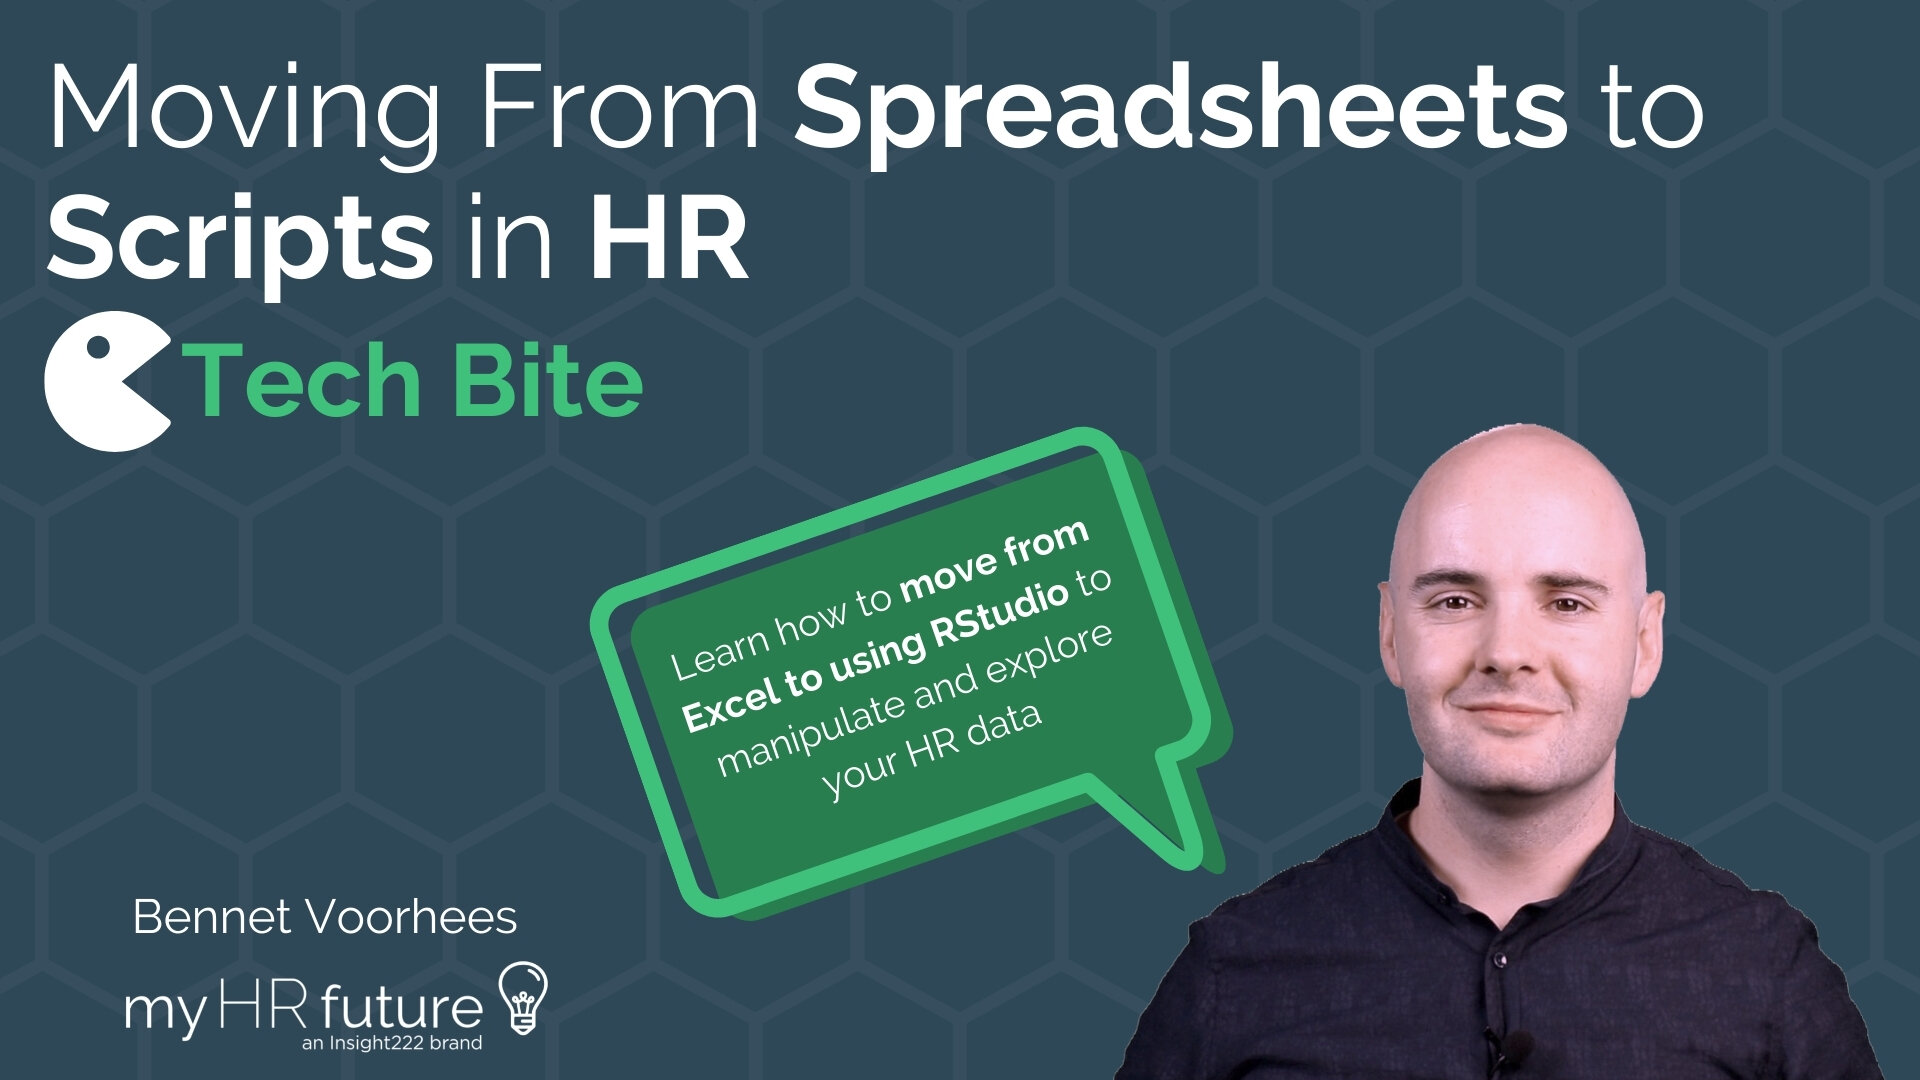 Moving from Spreadsheets to Scripts in HR